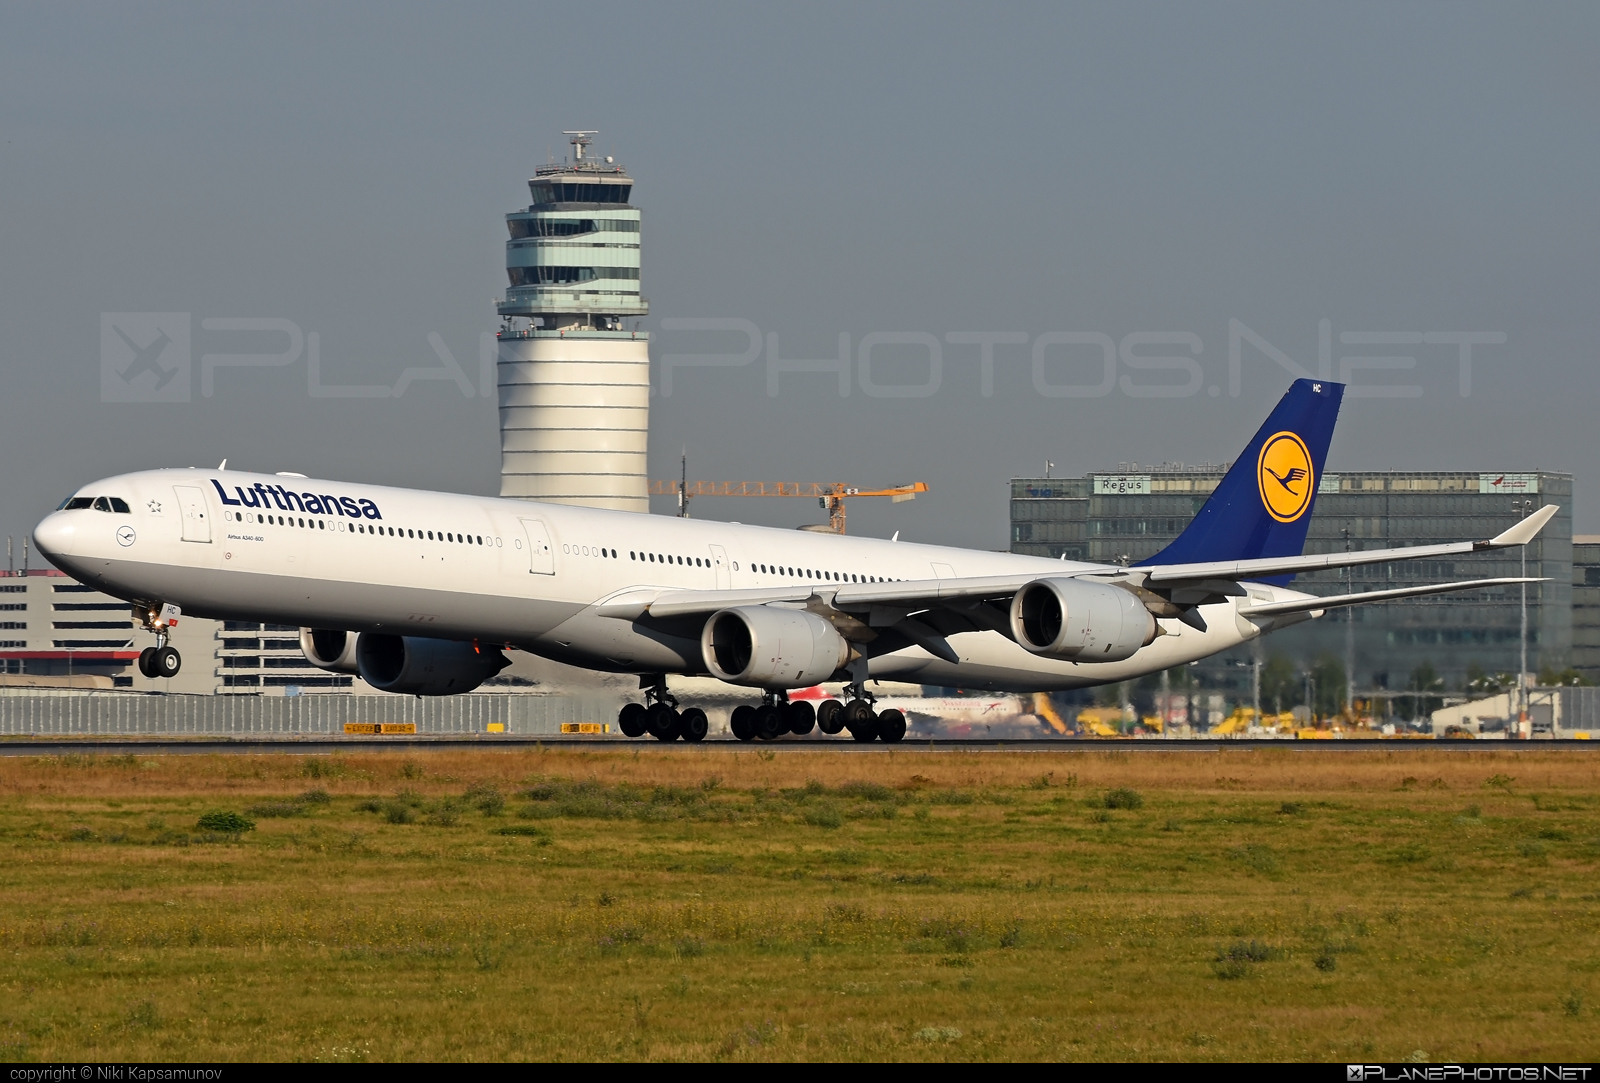 Airbus A340-642 - D-AIHC operated by Lufthansa #a340 #a340family #airbus #airbus340 #lufthansa